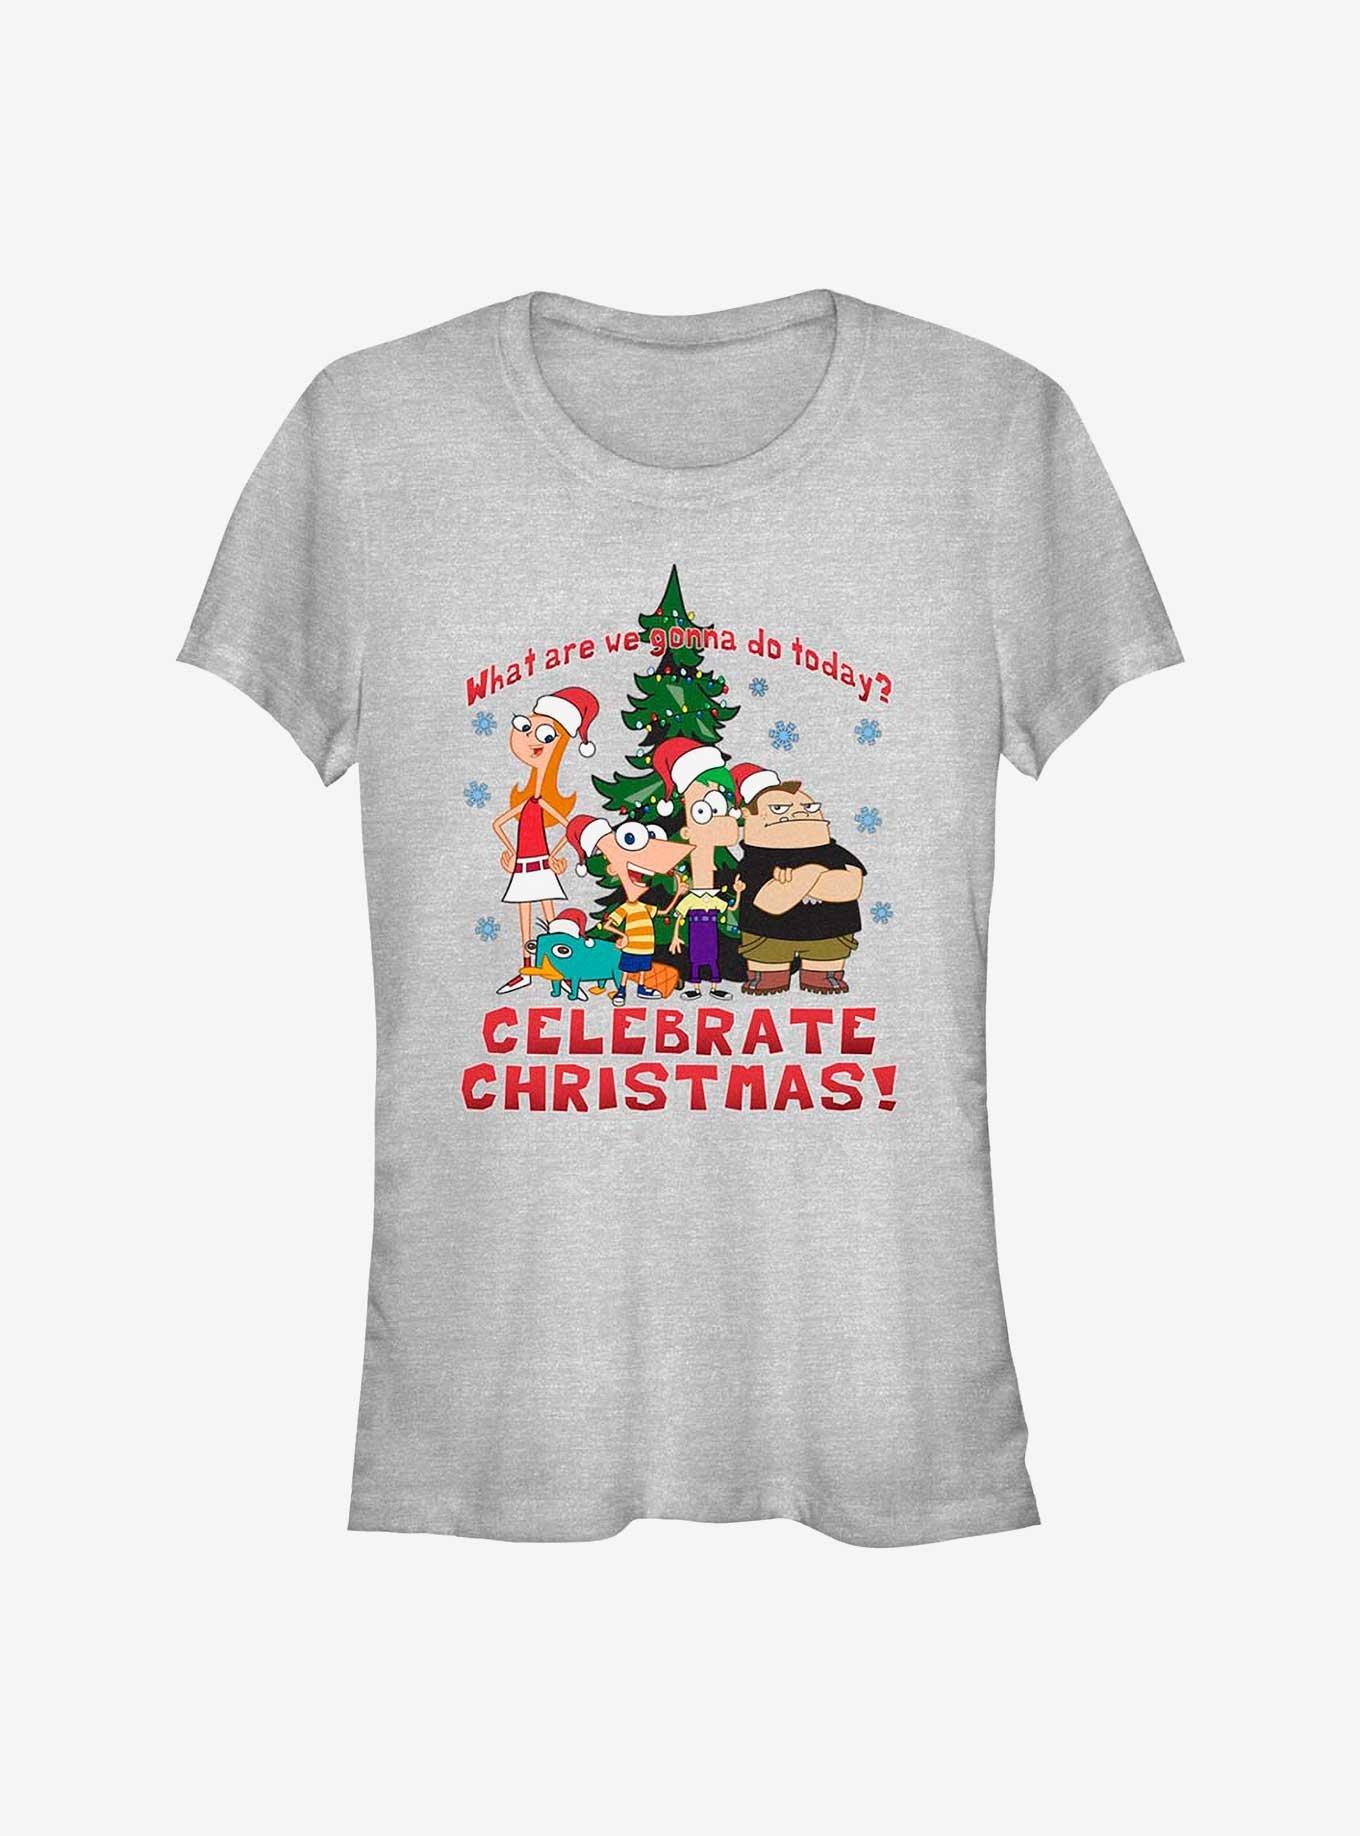 Disney Phineas And Ferb Christmas Girls T-Shirt